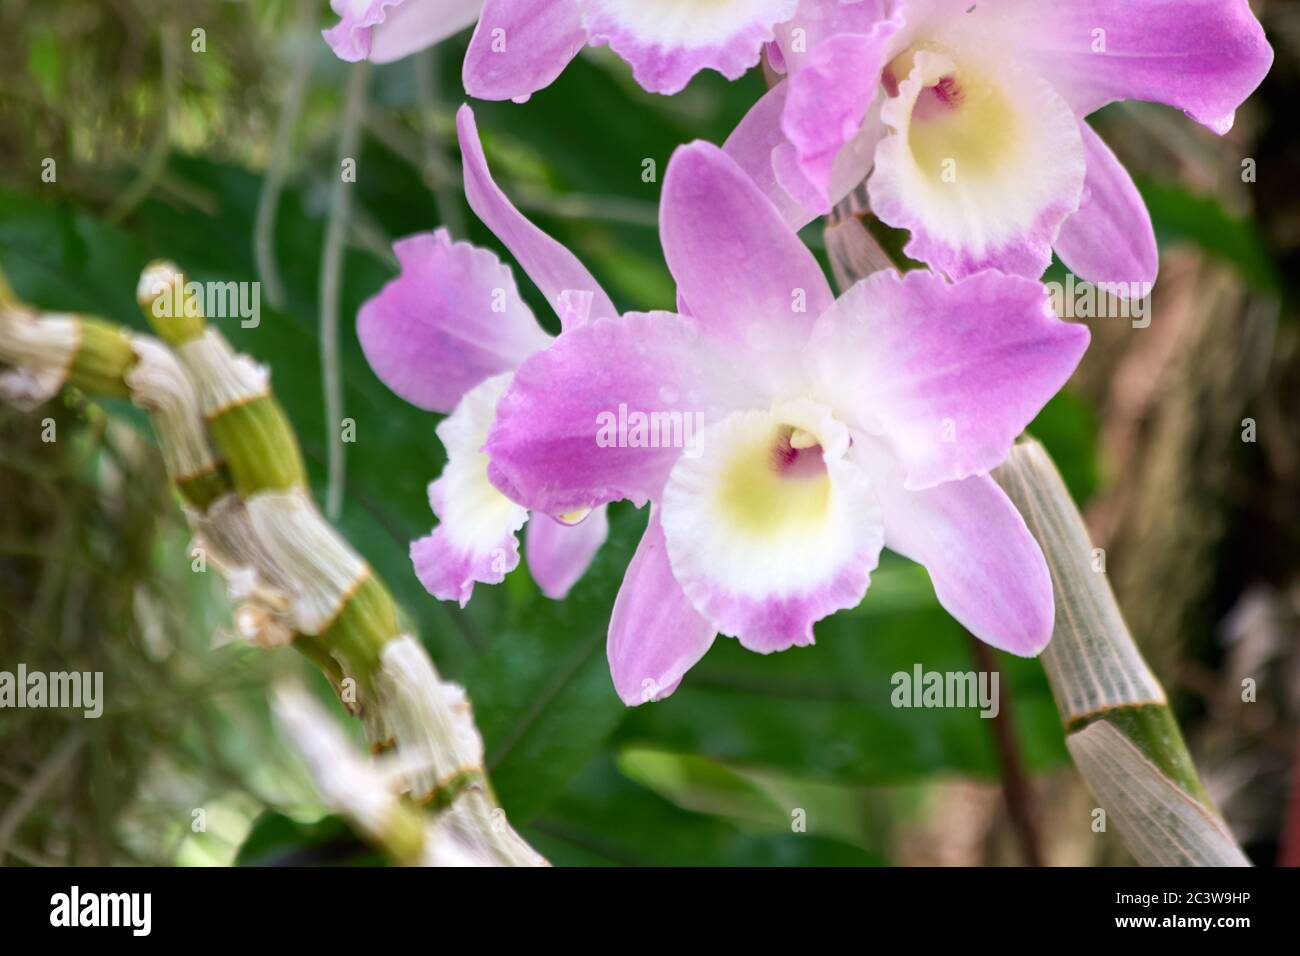 Beautiful purple dendrobium orchid flowers close up. Stock Photo